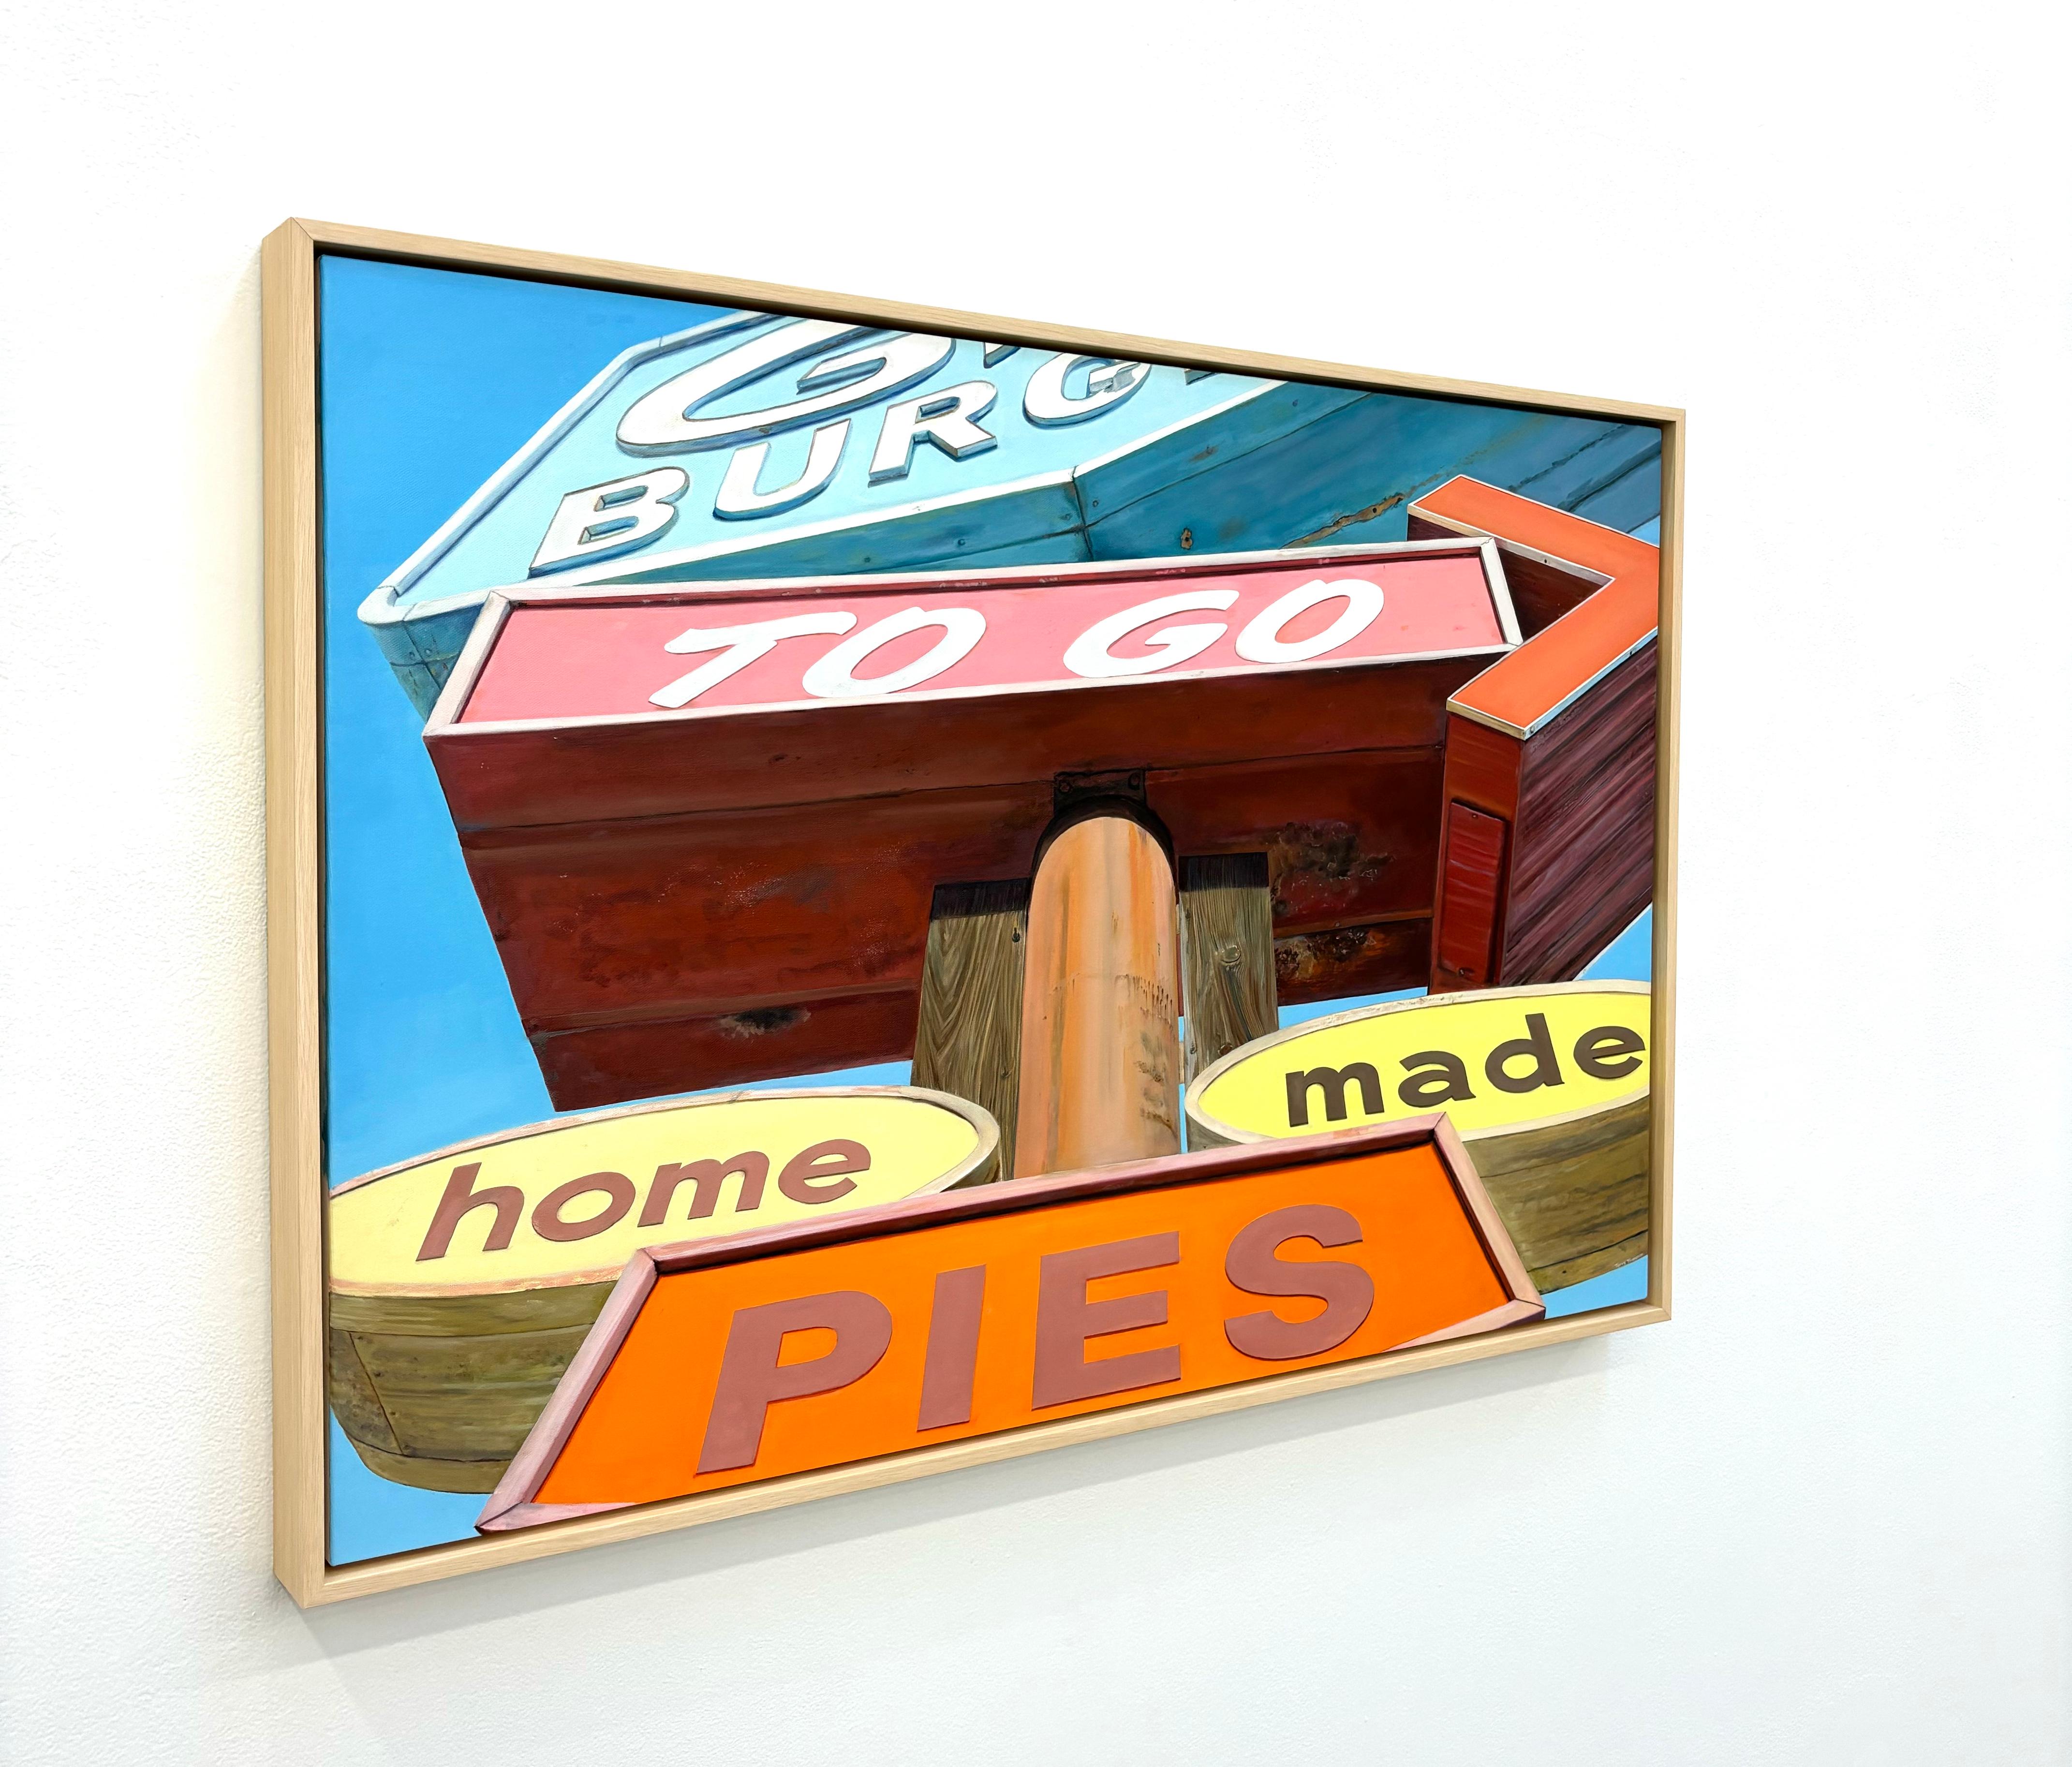 Oakland Burgers & Pies - Photorealist Painting by Terry Thompson